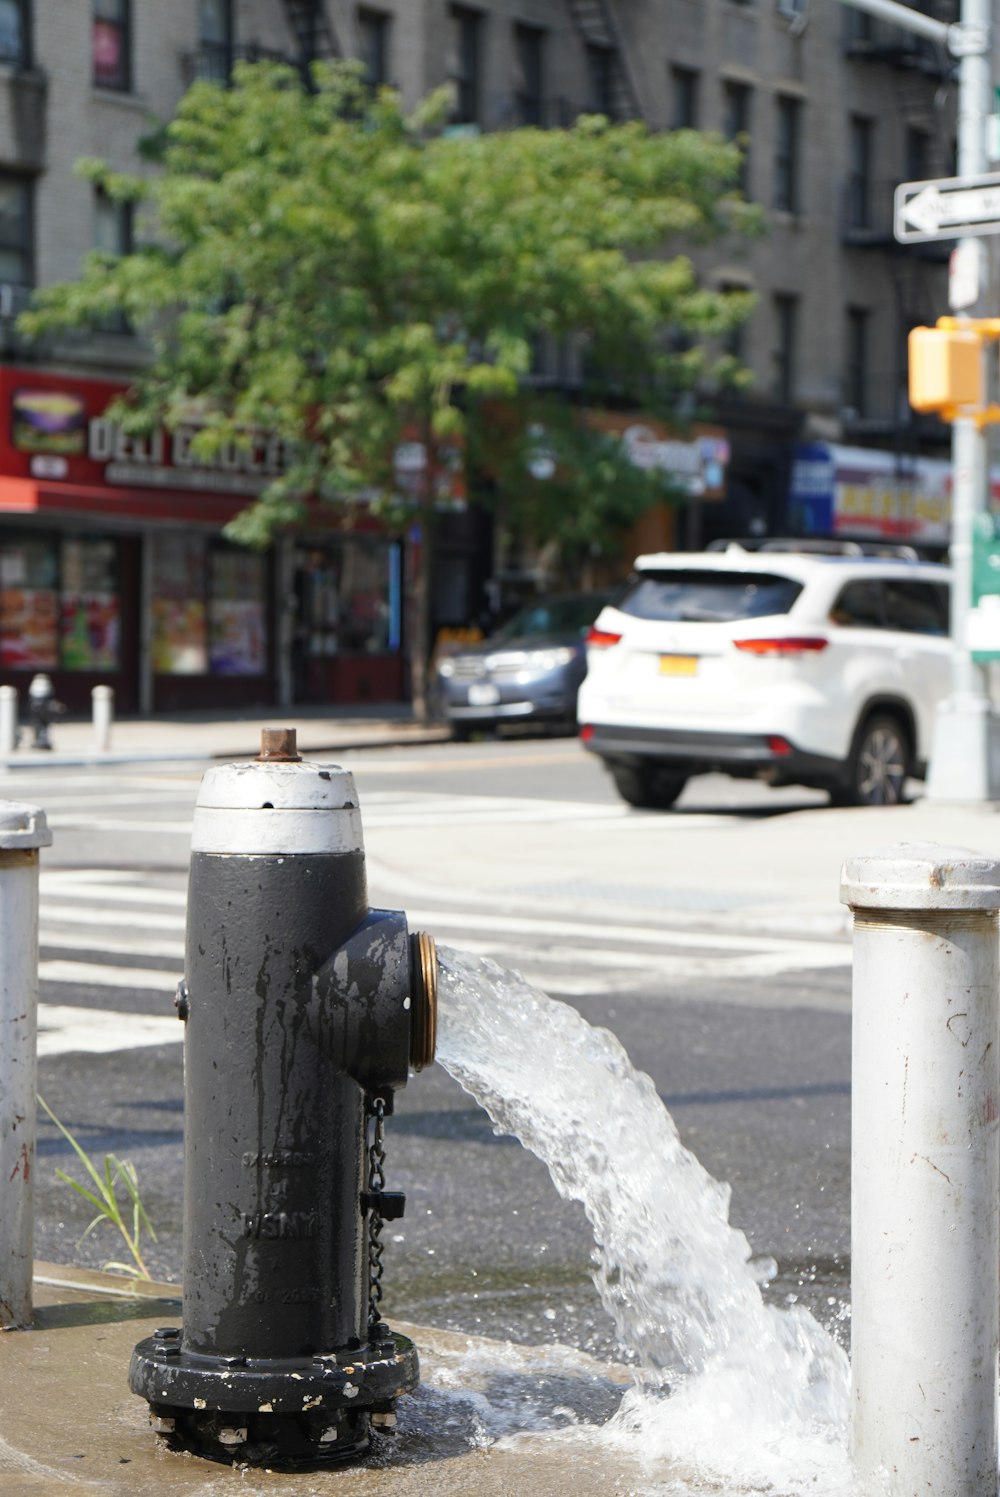 a fire hydrant spewing water on a city street